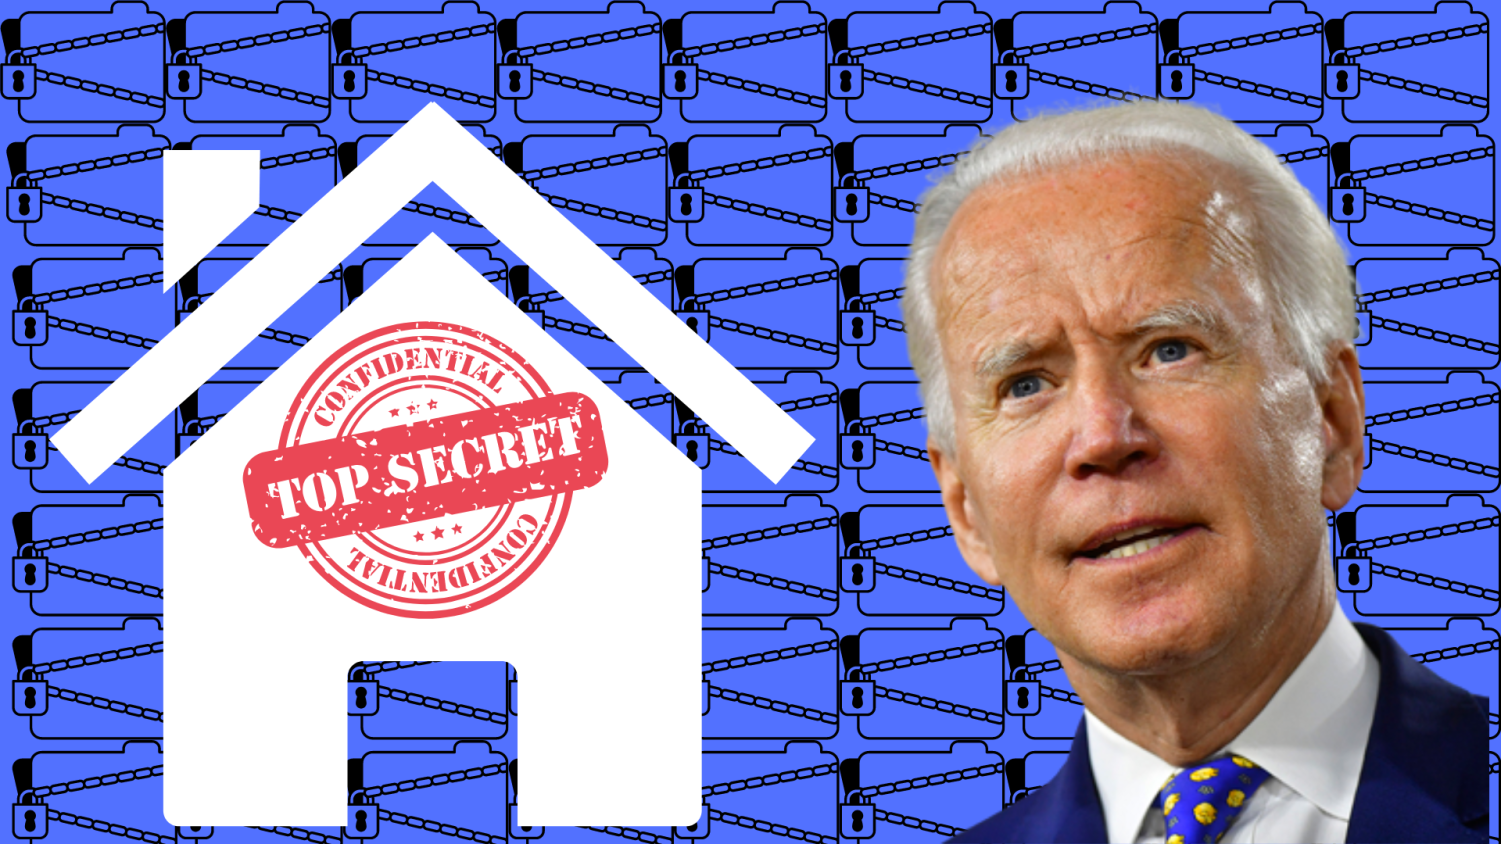 President Biden’s home searched for classified information